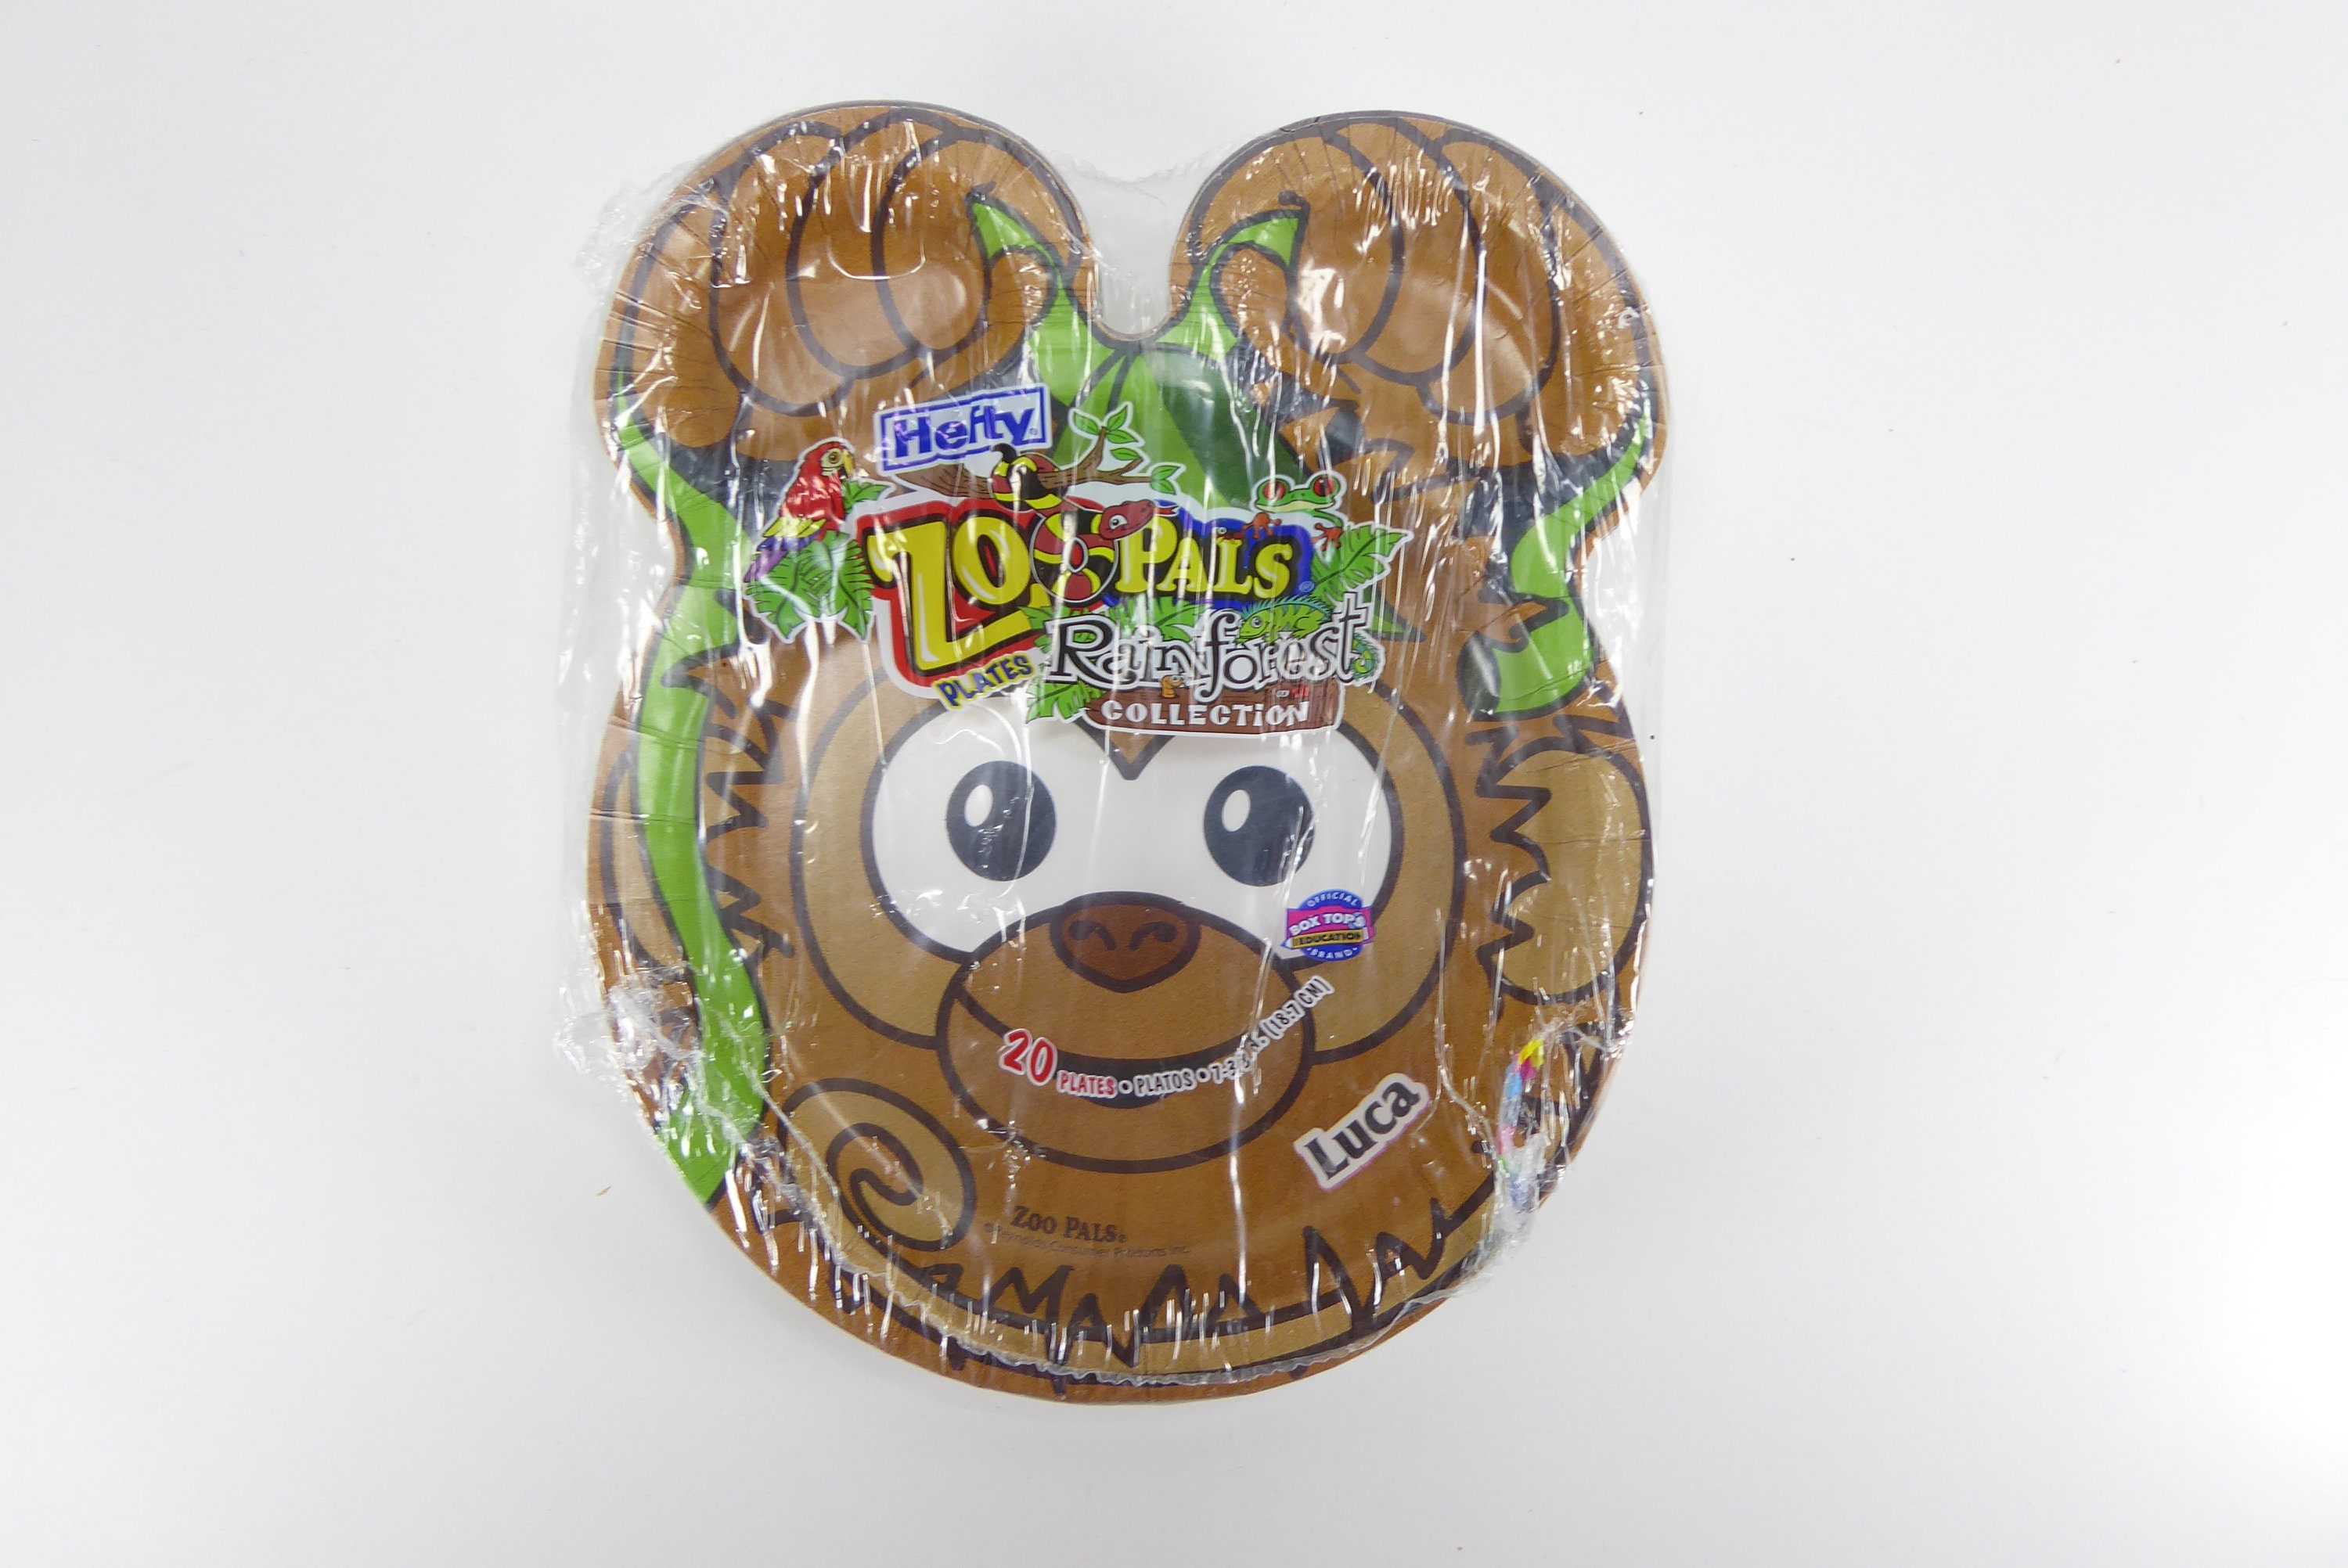 Hefty Zoo Pals Rainforest Collection Plates Sealed 